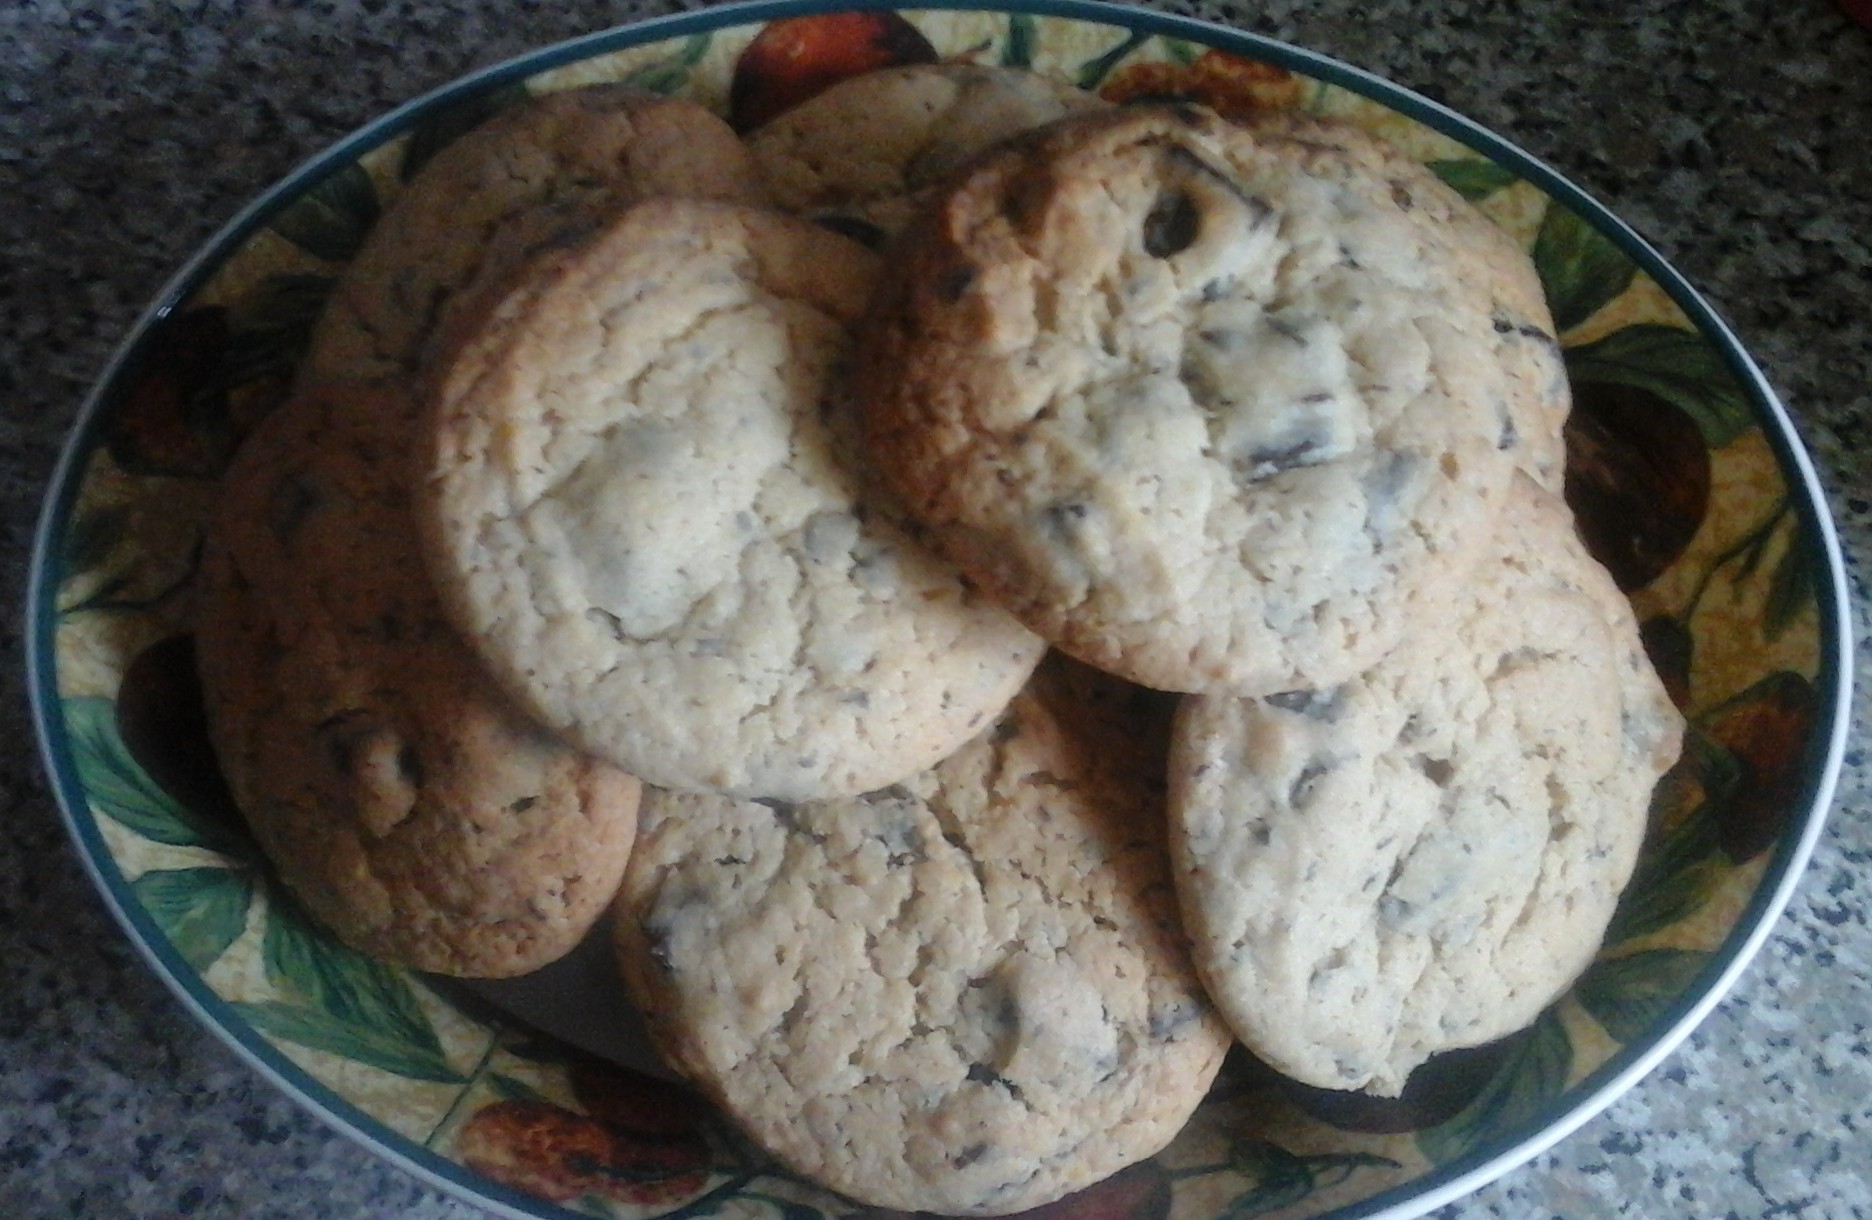 Chocolate Chip Cookies from Linda McCartney recipe, altered slightly